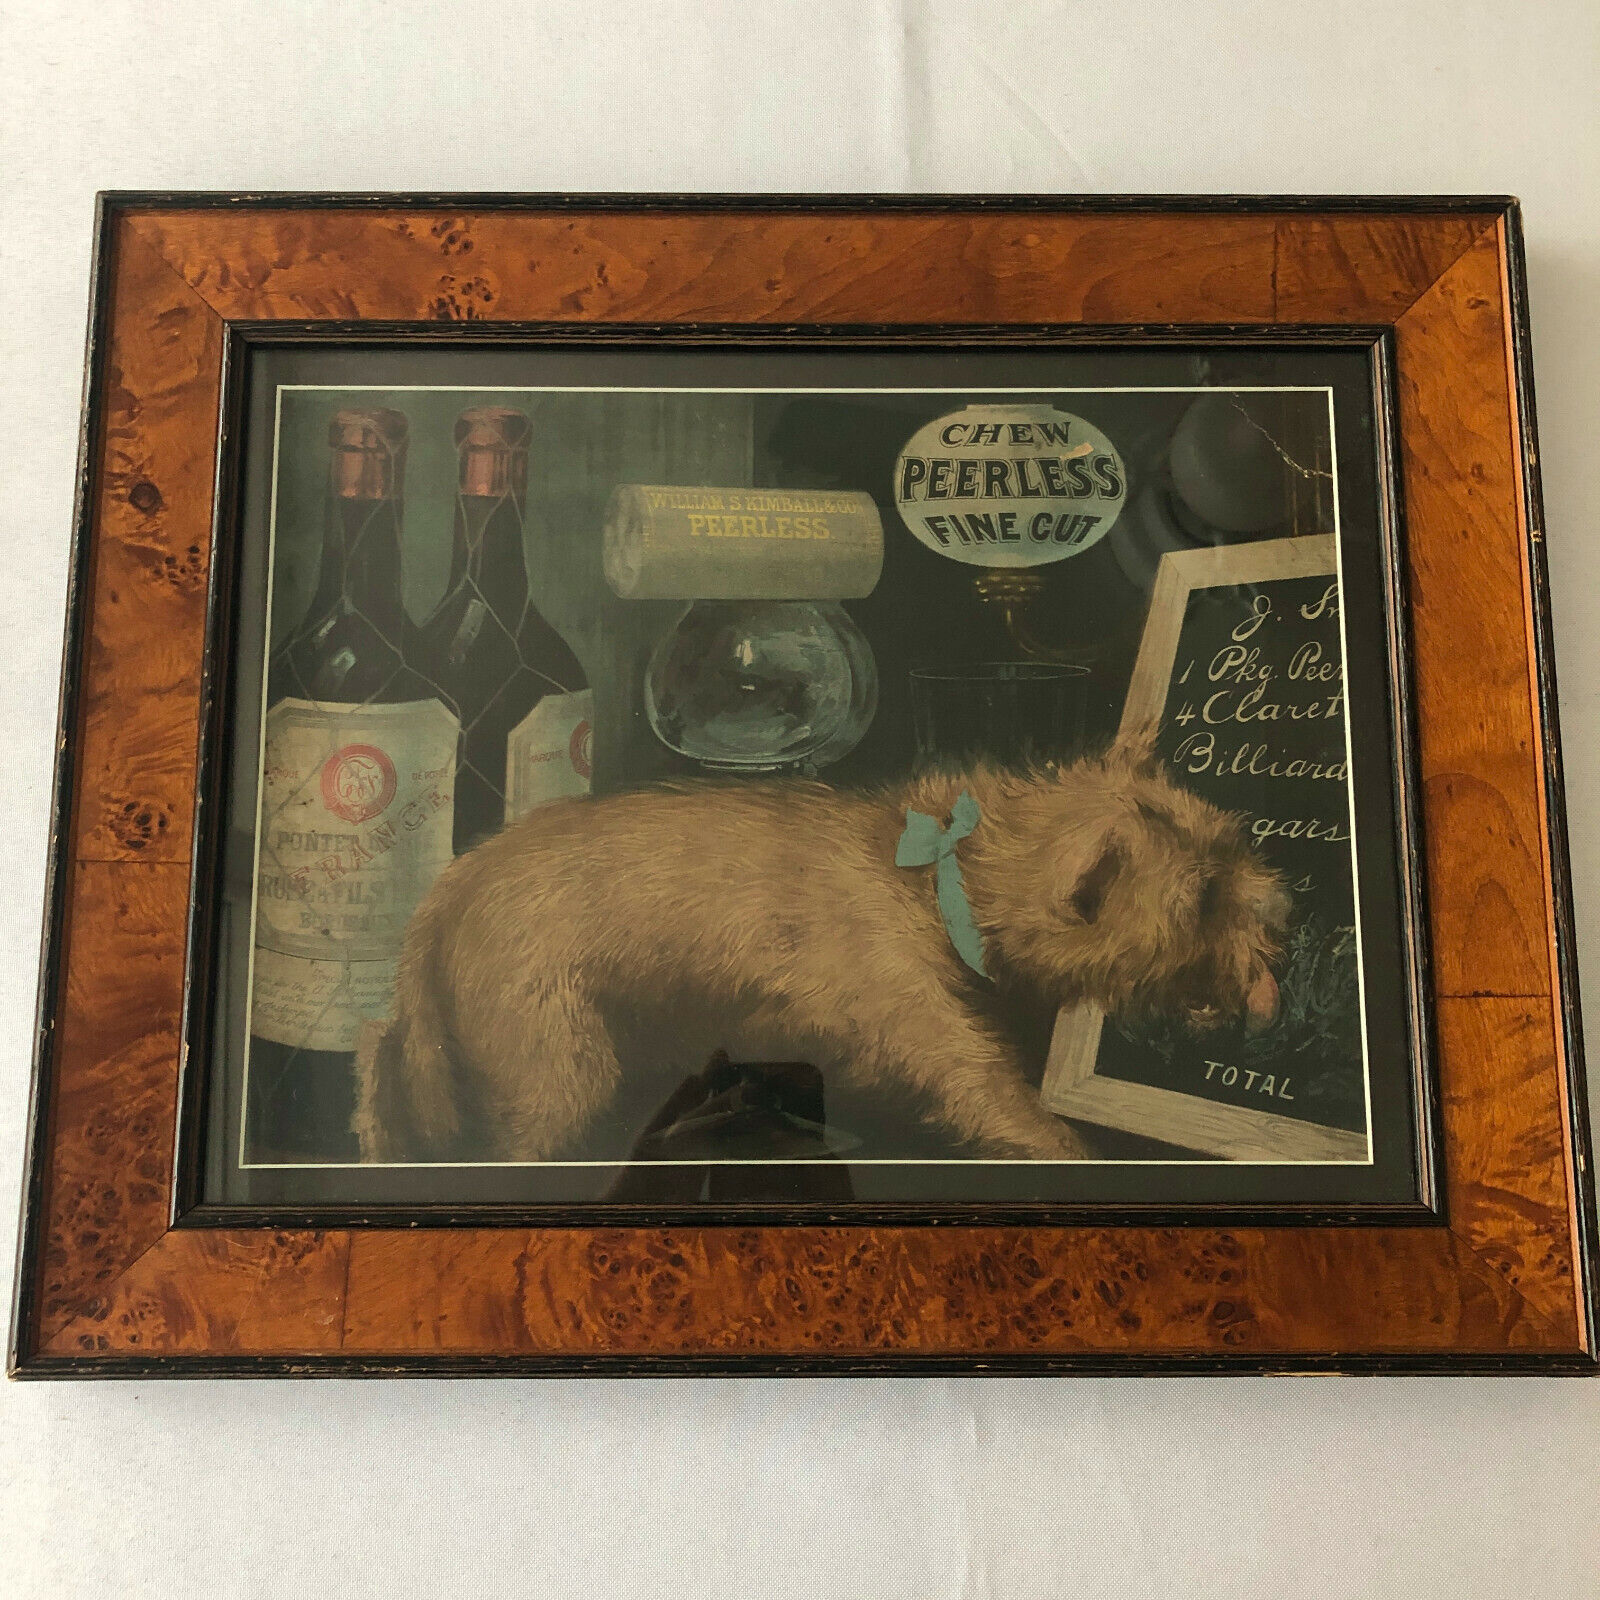 Poster Store Display Peerless Fine Cut Chewing Tobacco Framed Dog Vintage